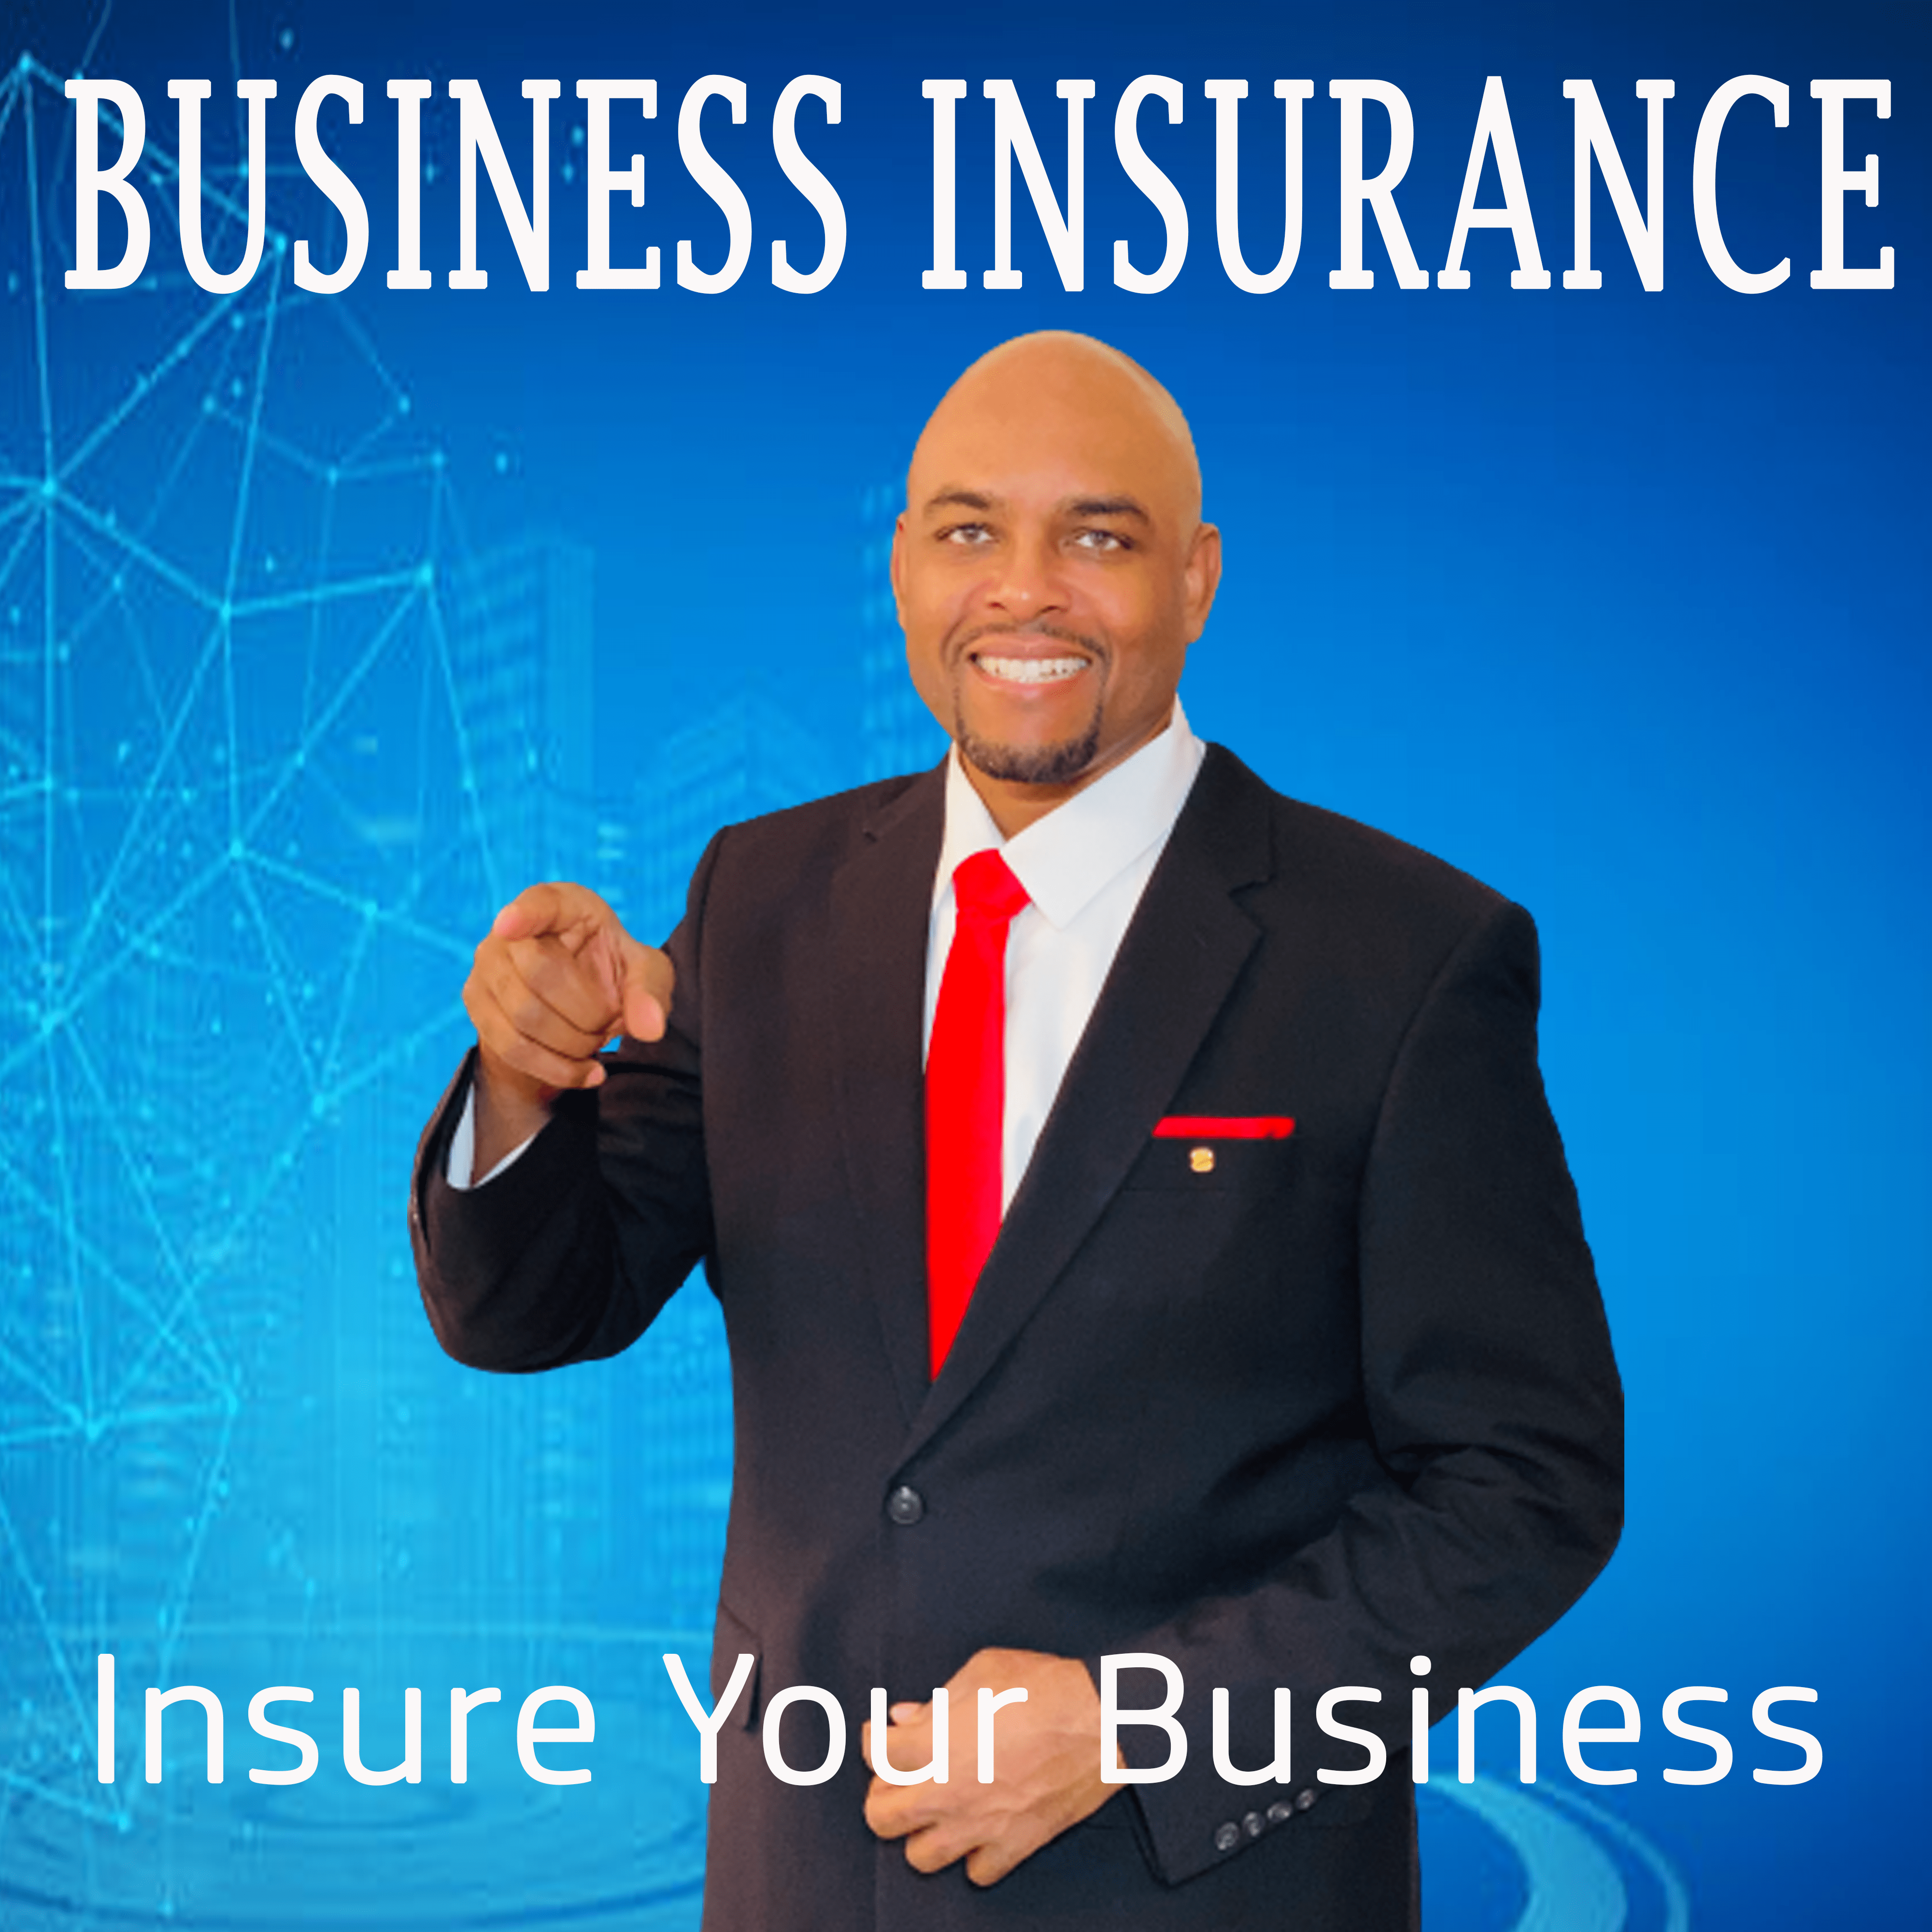 Business insurance is intended for businesses to seek coverage to protect from potential damage to property, to protect from lawsuits, or contract disputes.